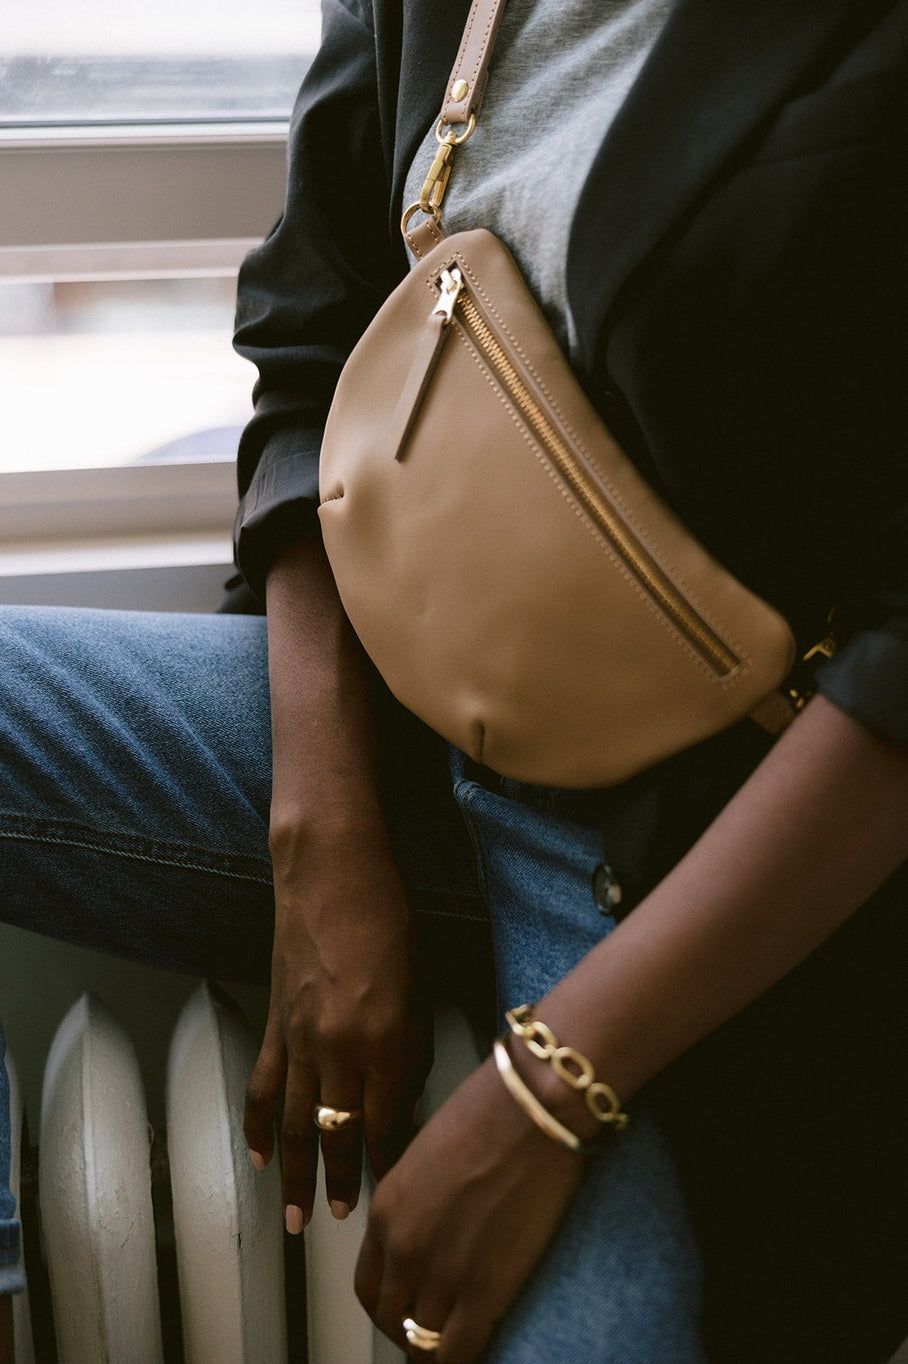 Fair trade and adjustable leather sling bag/fanny pack. Adjust the length to fit your needs. Handcrafted, vegetable tanned leather sling bag made in Kenya with locally and ethically-sourced materials. A portion of sales go to an organization in Tanzania empowering children living on the street.